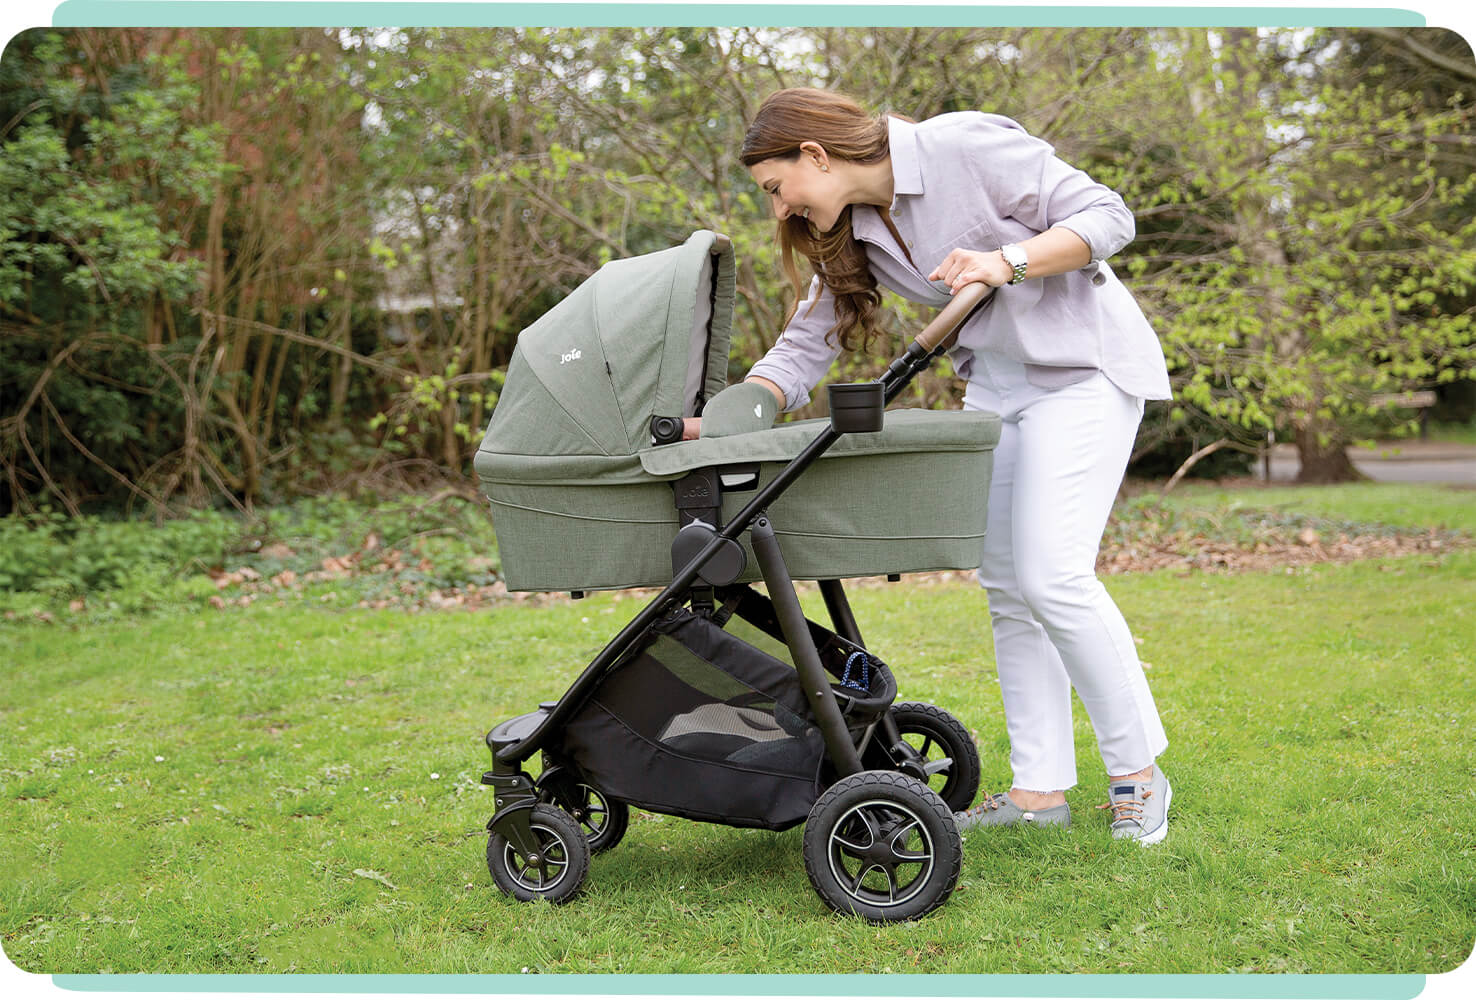  Joie Ramble xl carry cot in light green sitting on pushchair with women leaning over push bar reaching for baby in carry cot. 